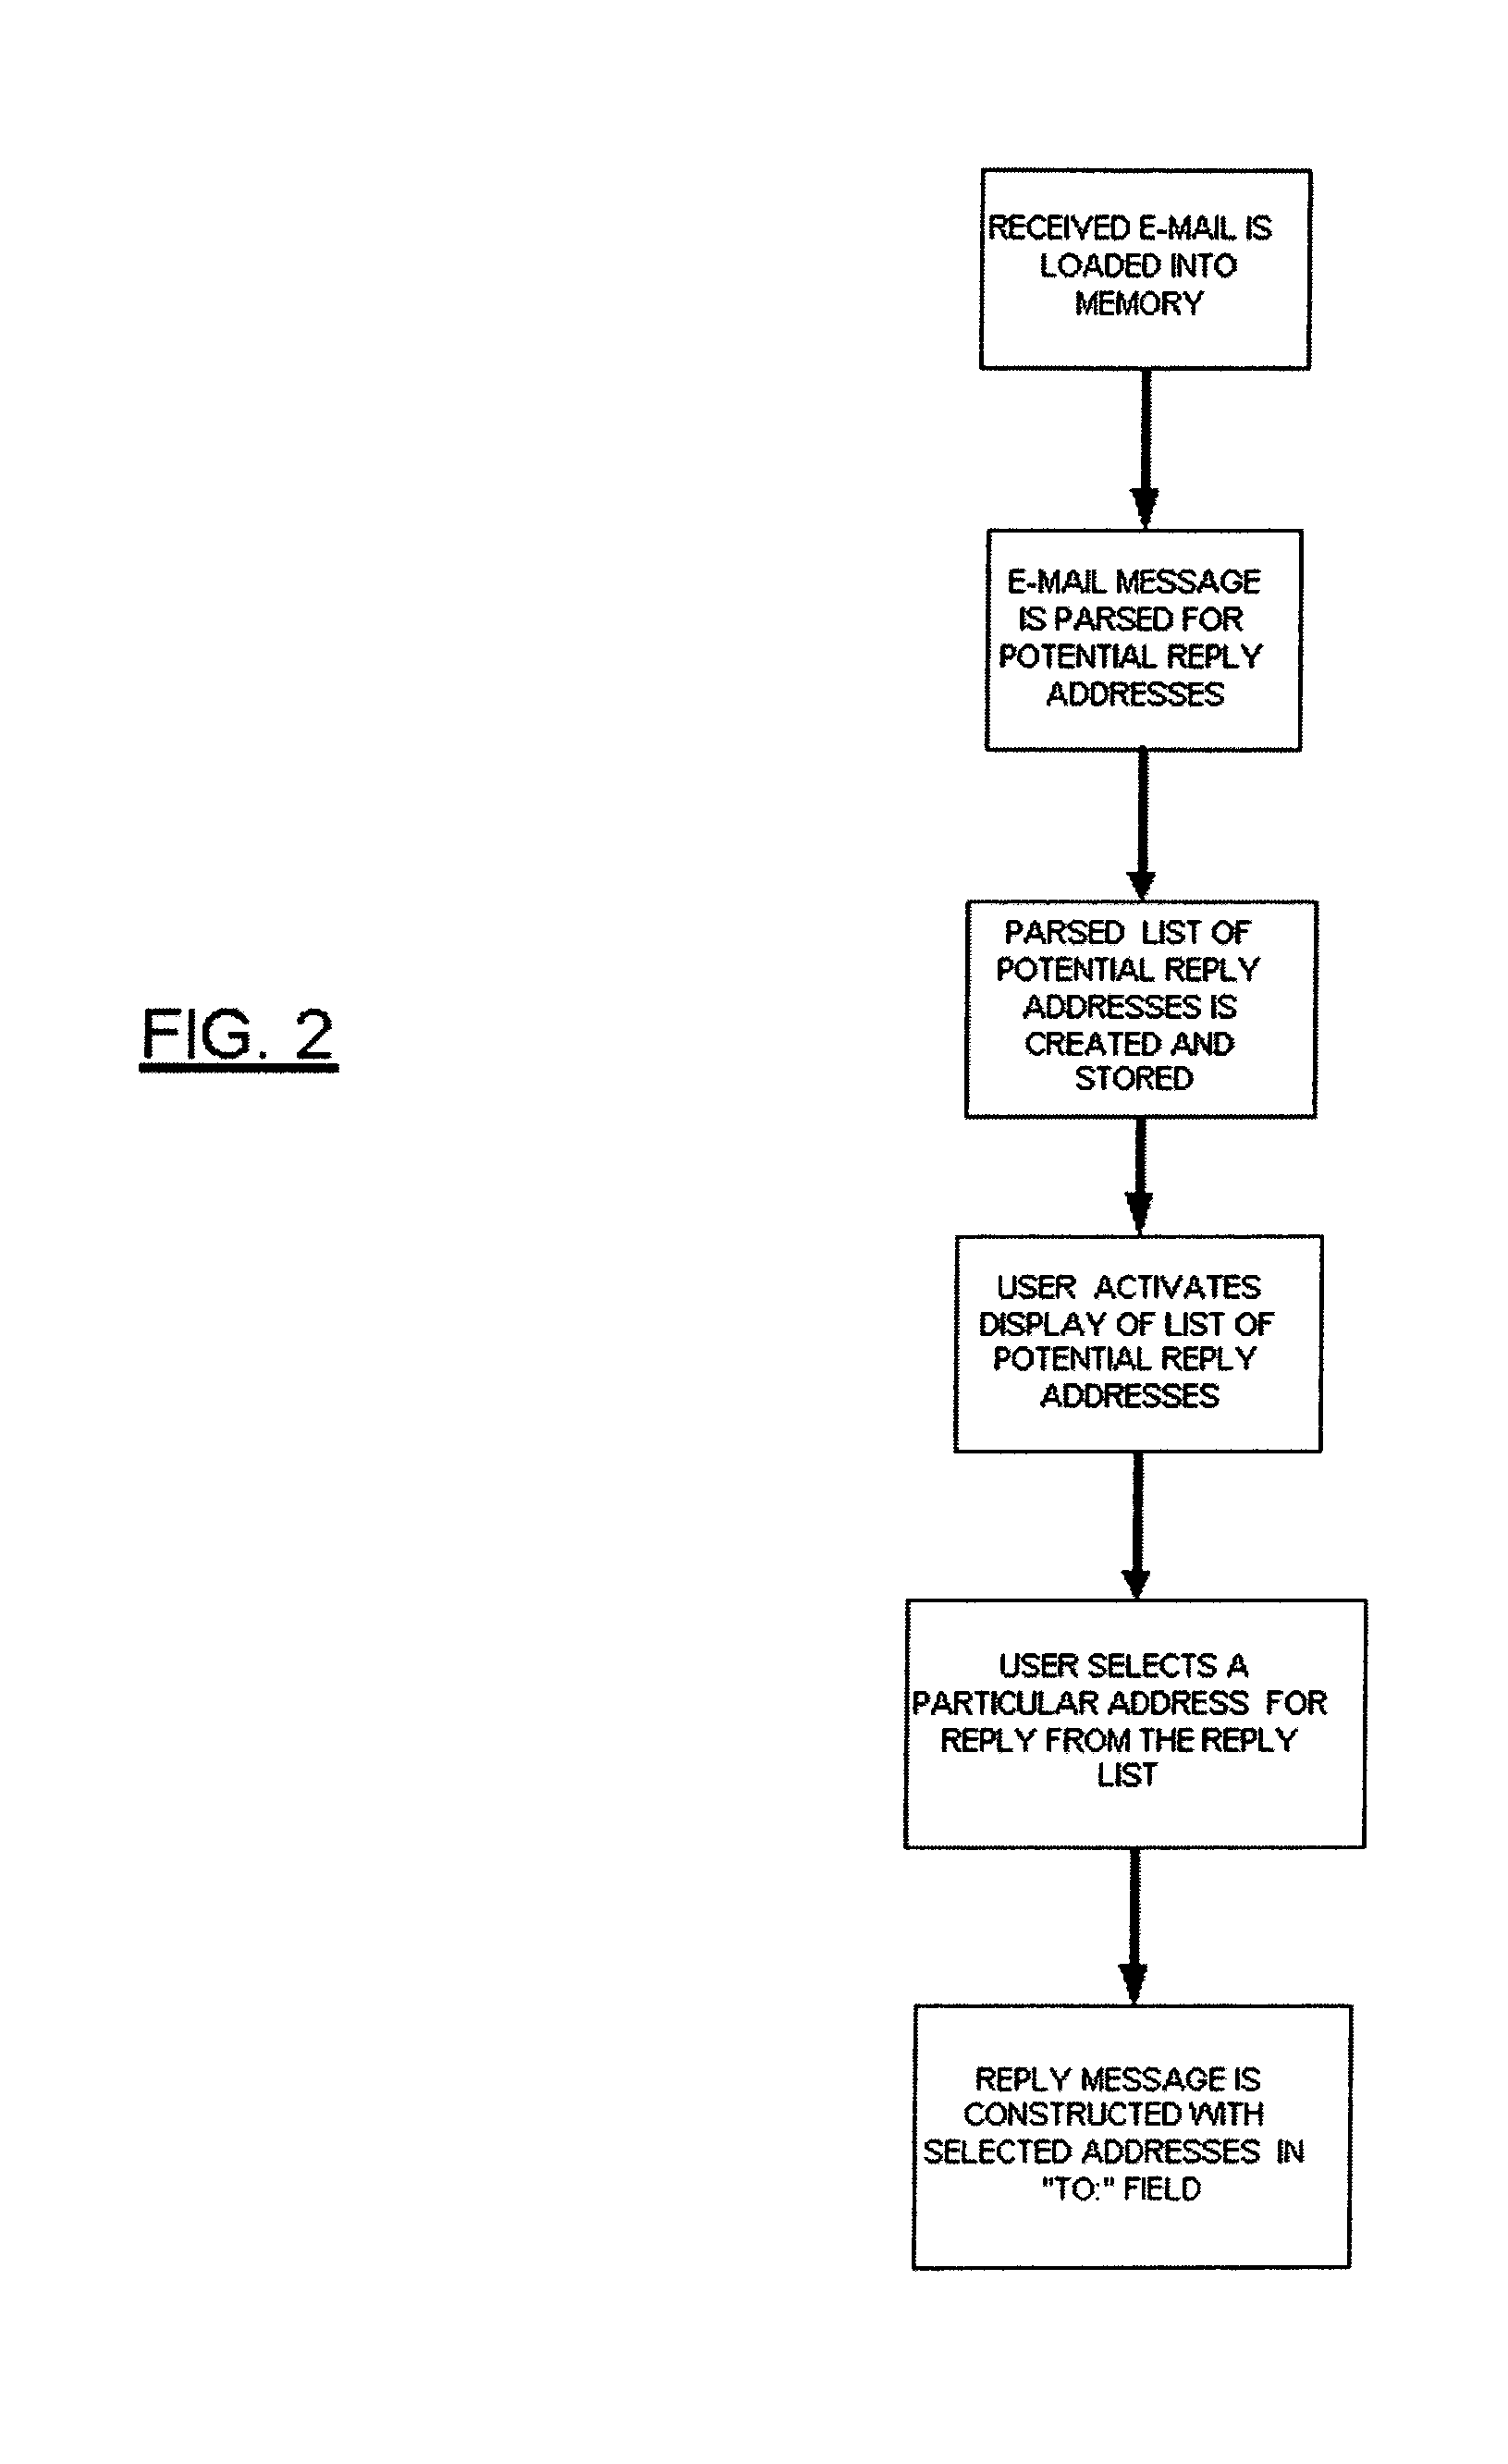 Method and computer product for identifying and selecting potential e-mail reply recipients from a multi-party e-mail